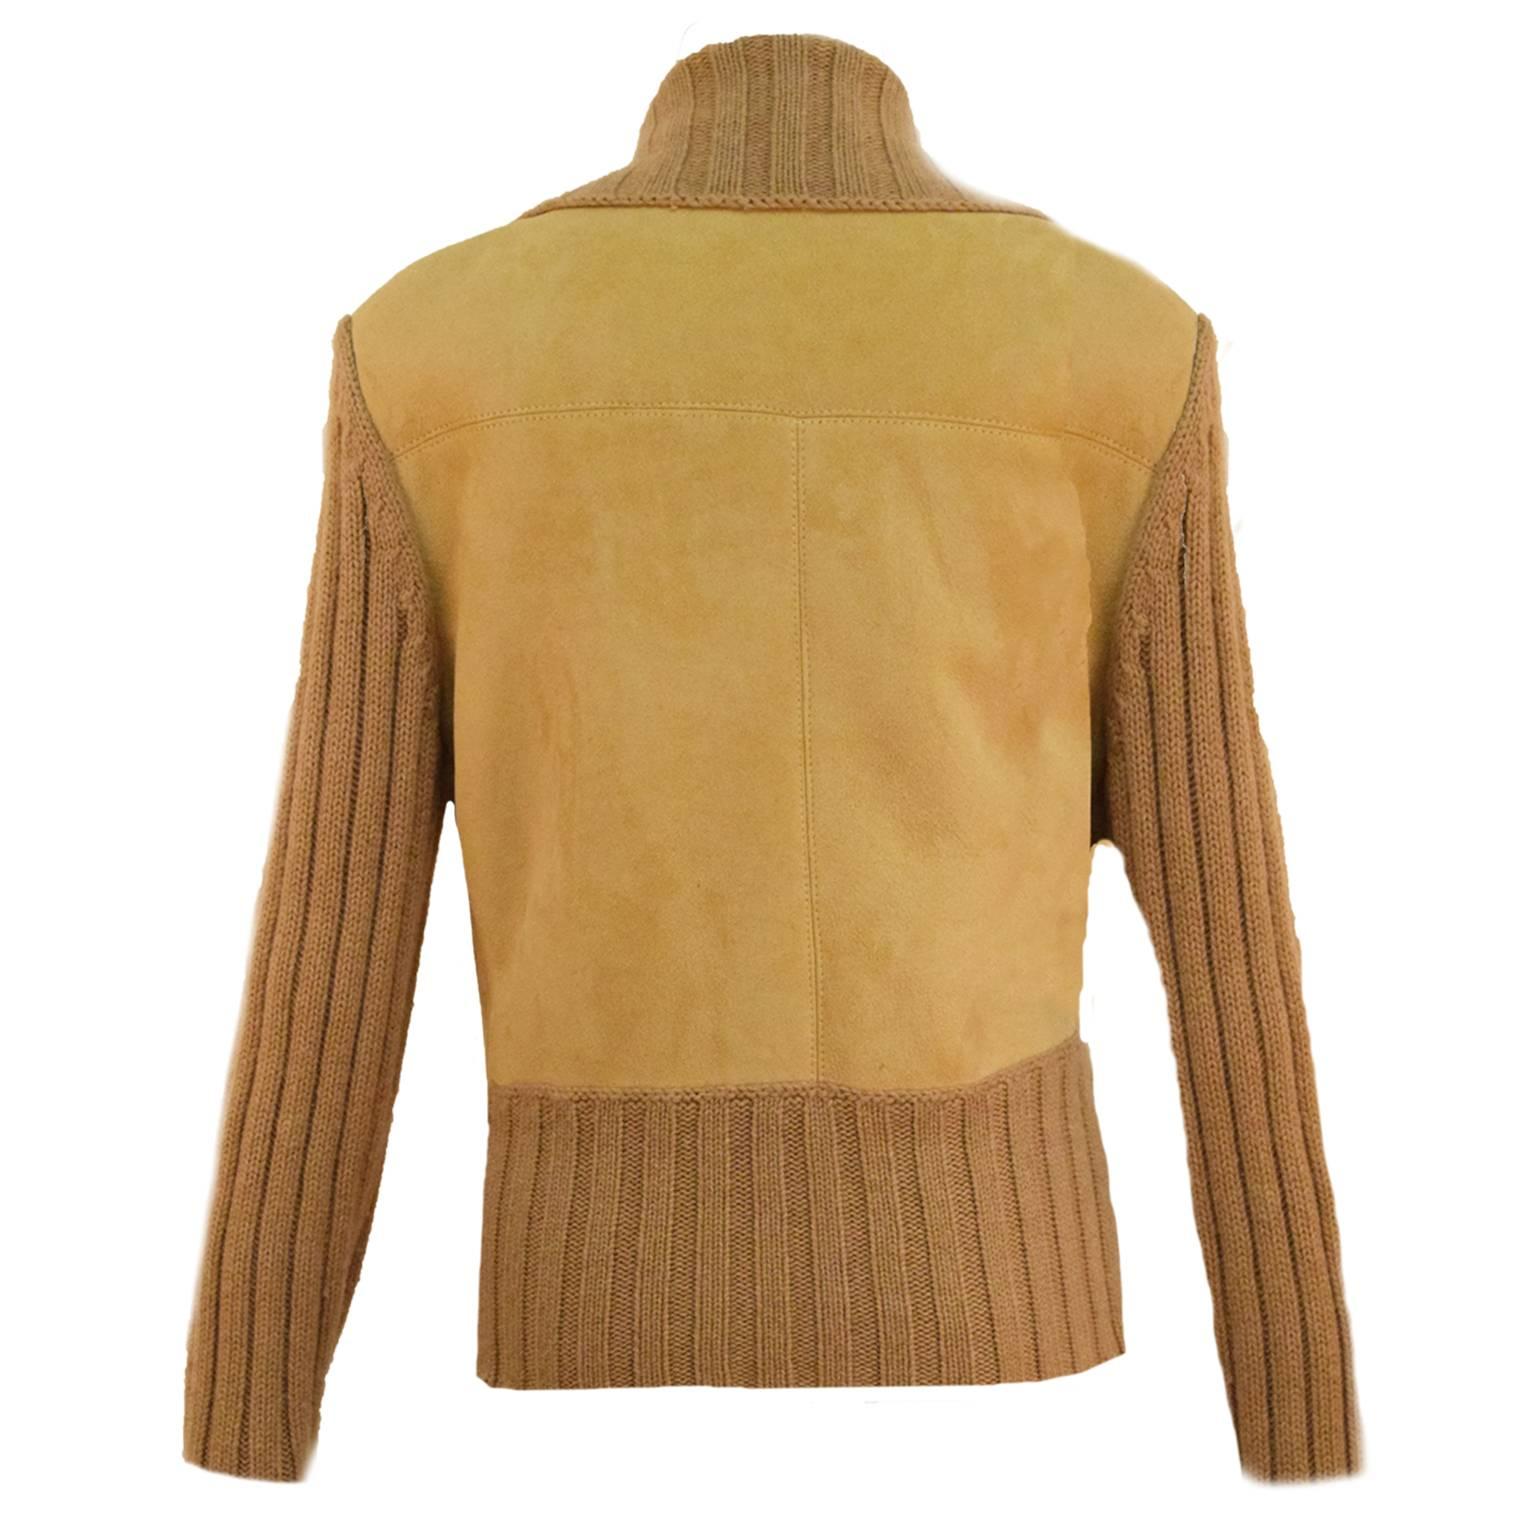 Beige shearling, cashmere knitted sleeve. Zipped closure, and high knitted neckline.